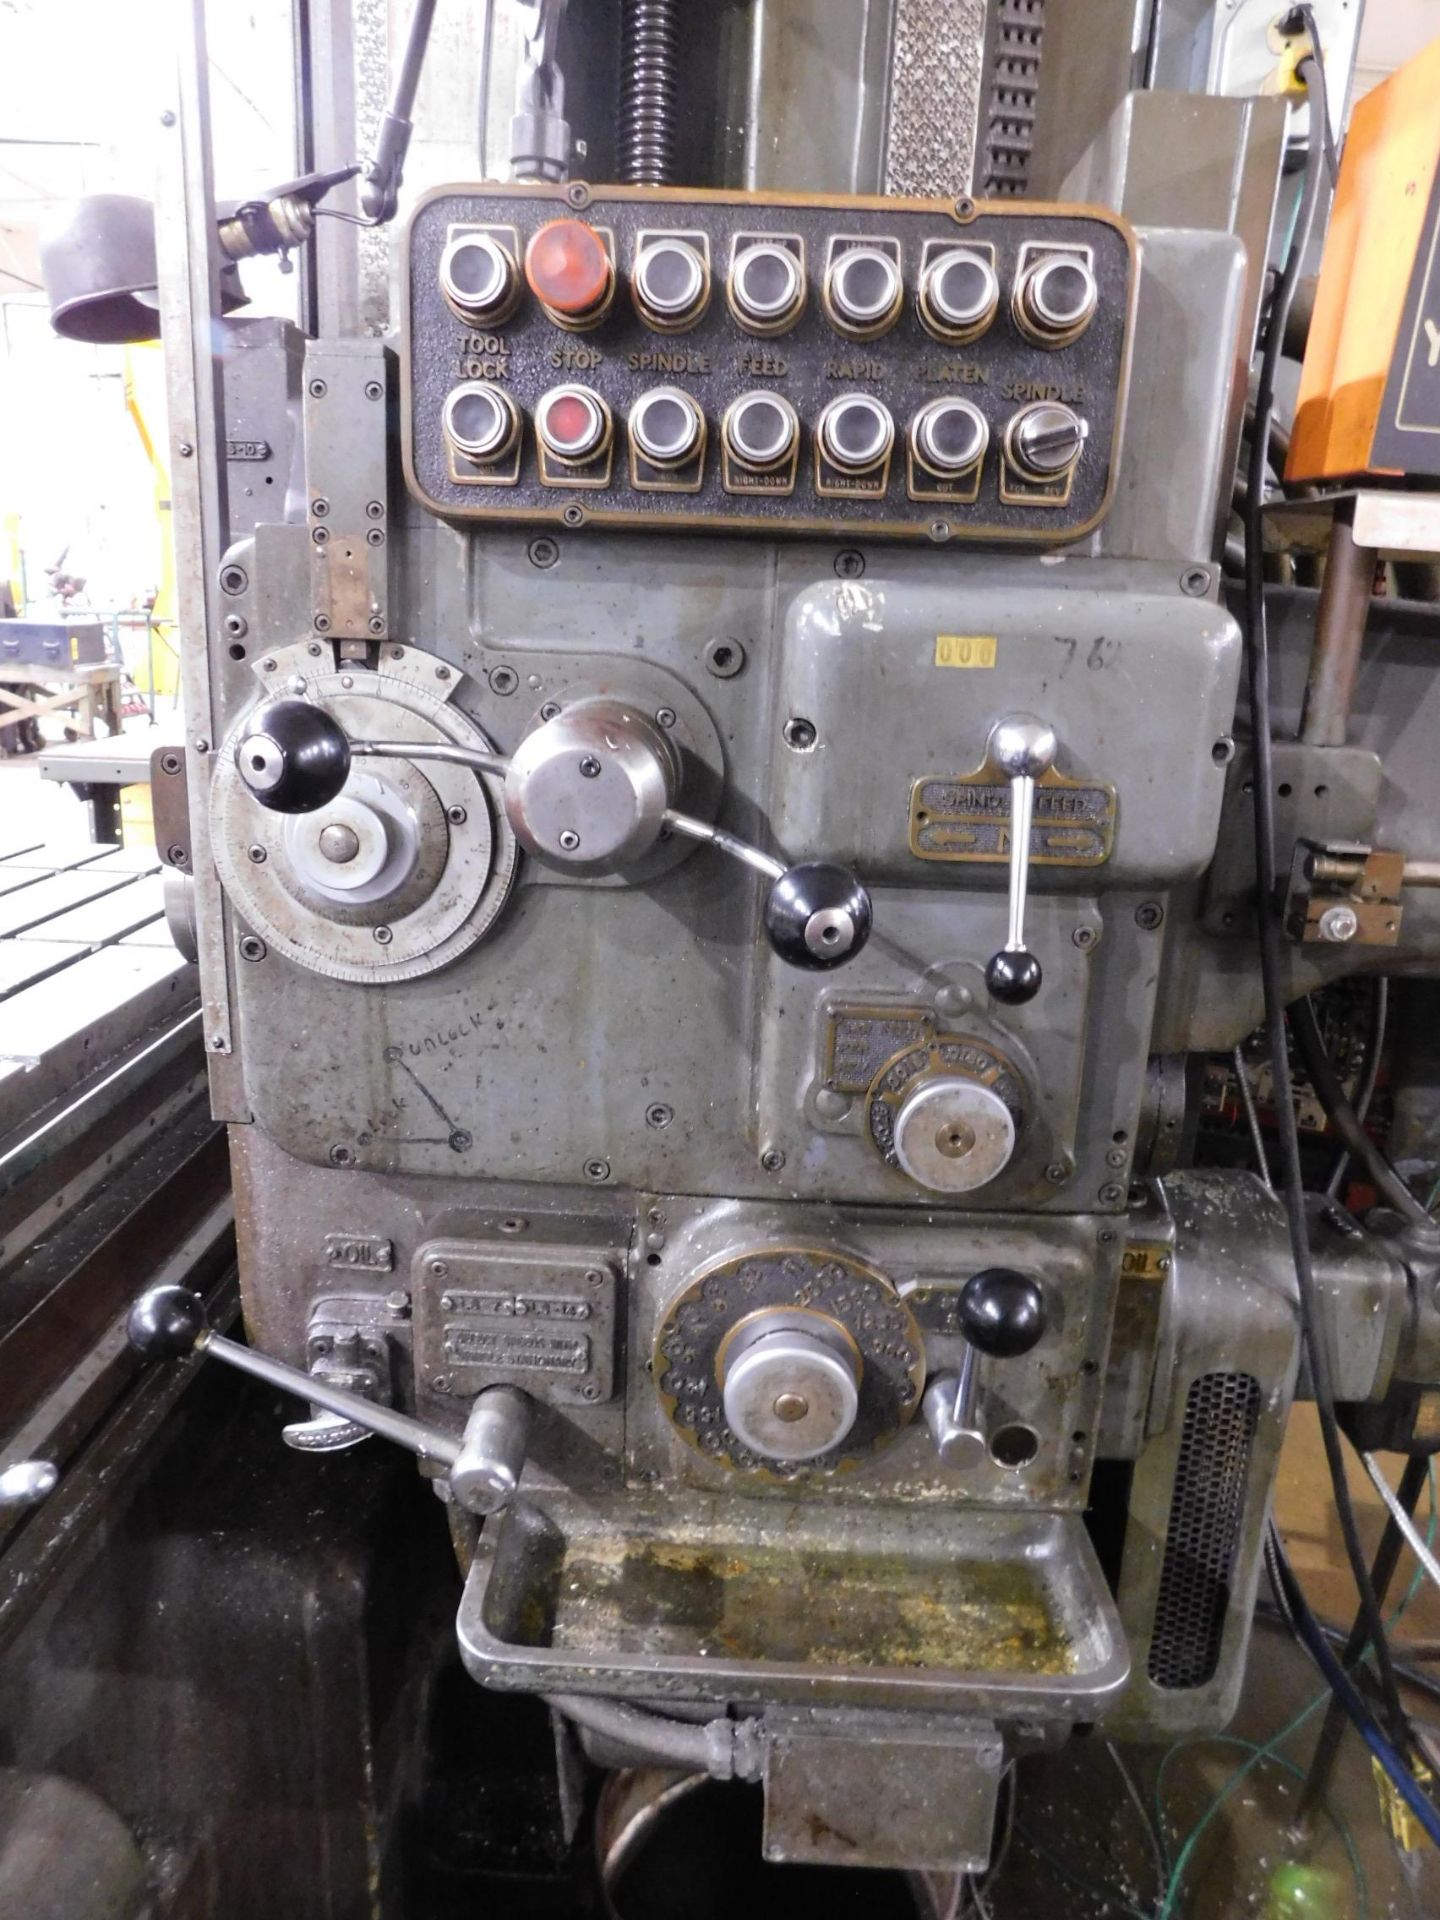 Devlieg 2B-36 Spiramatic Jig Mill, s/n 4-14151, 2 1/2" Spindle, 40 Taper, 24" X 36" Table, 24" - Image 4 of 7